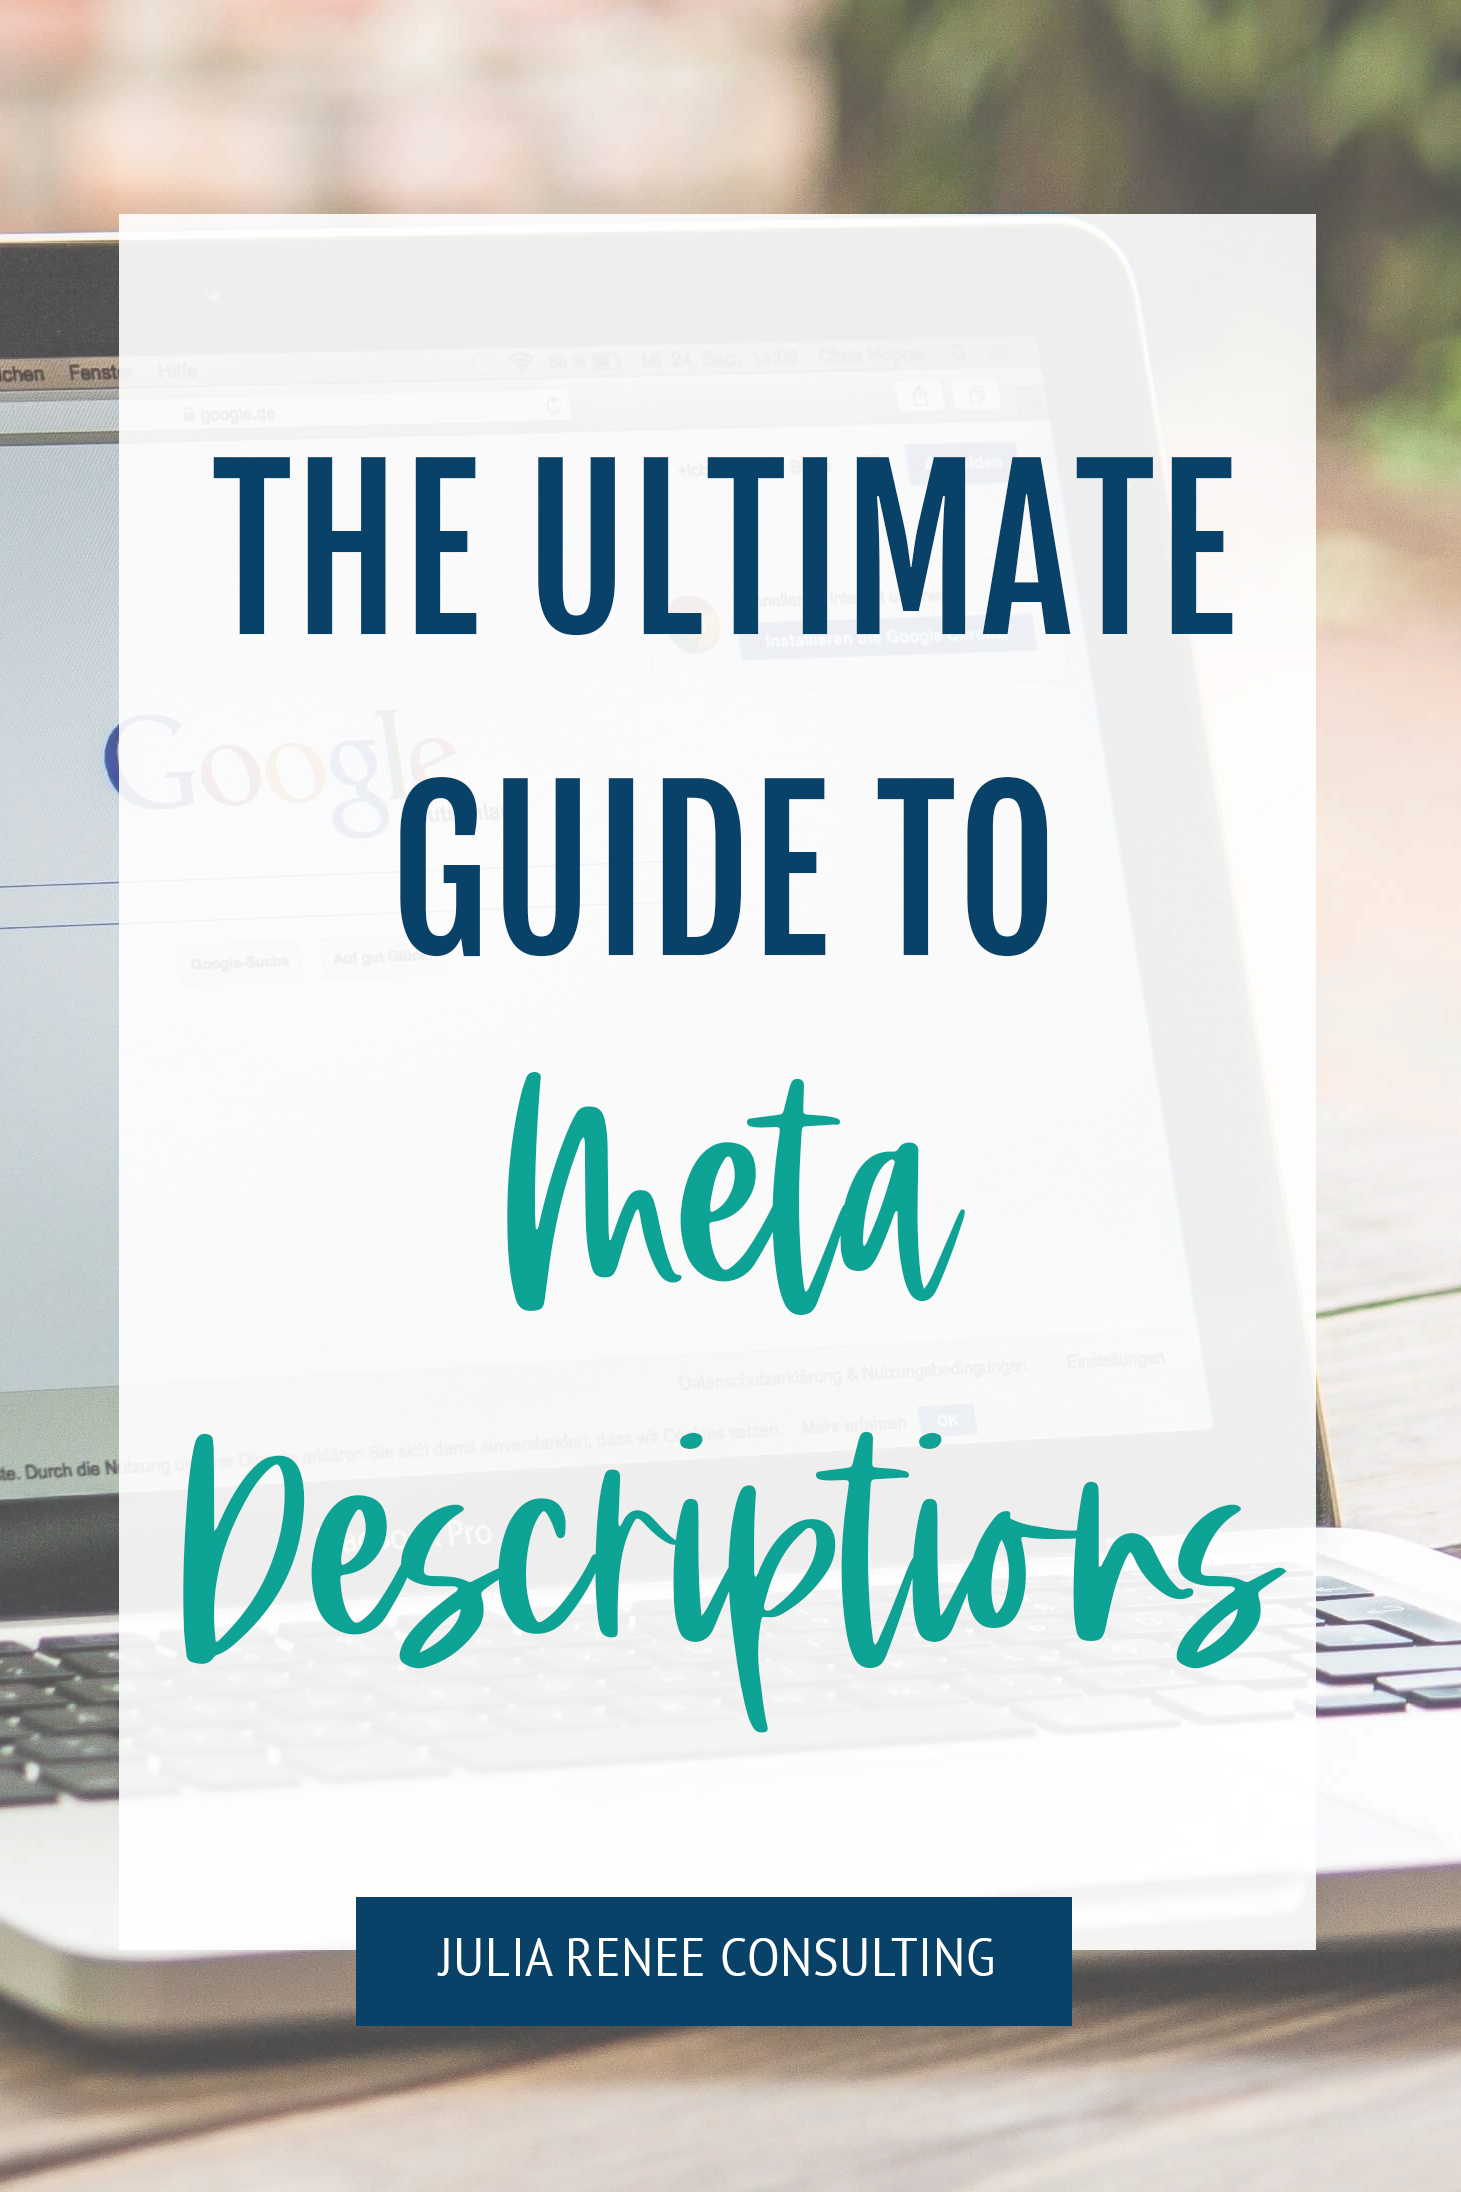 How to Write Title Tags and Meta Descriptions for SEO